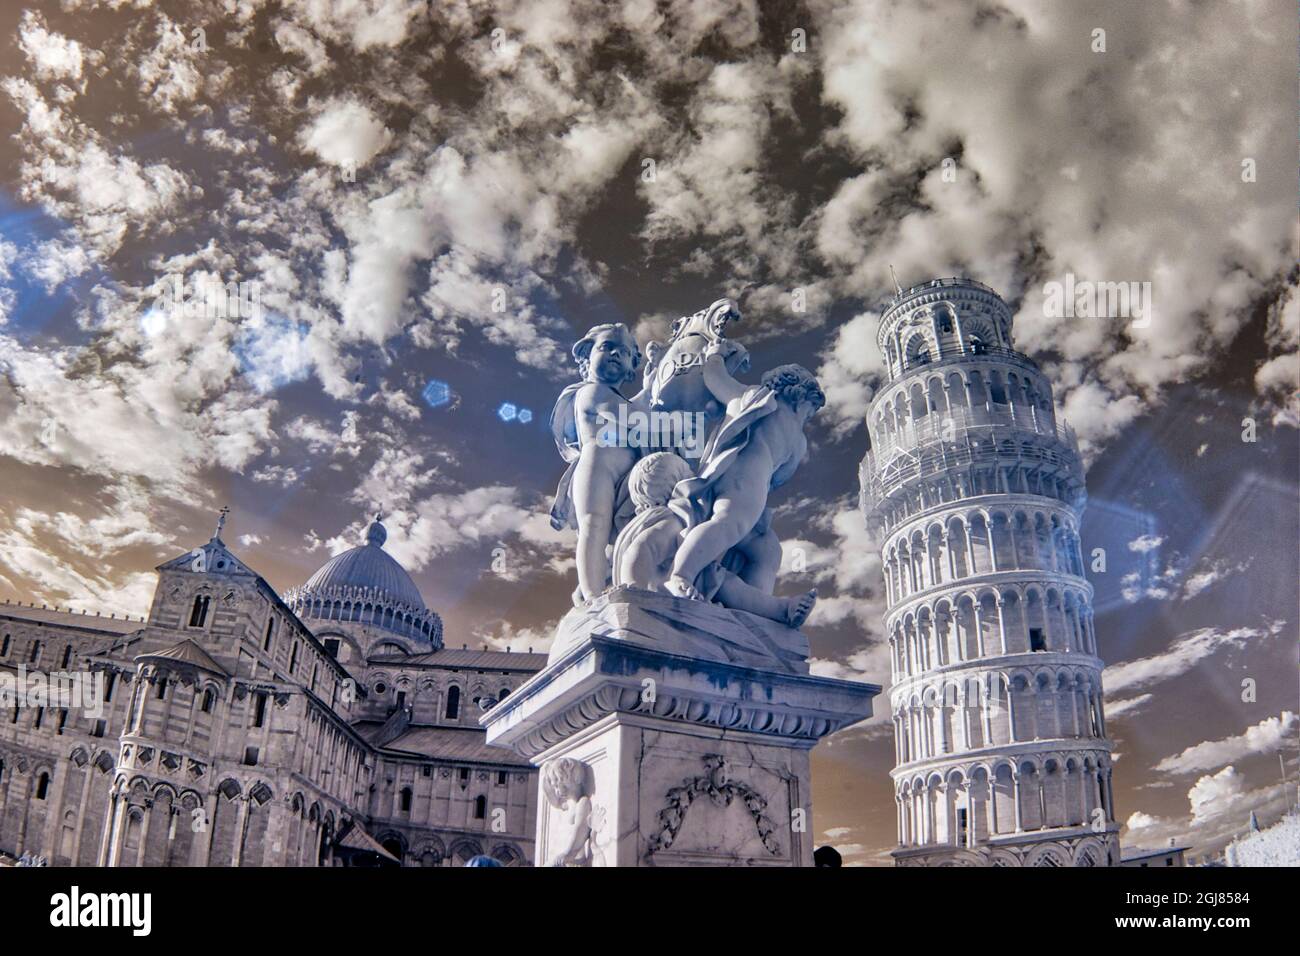 Italy, Pisa. Infrared image of the Campo dei Miracoli (field of miracles) Stock Photo